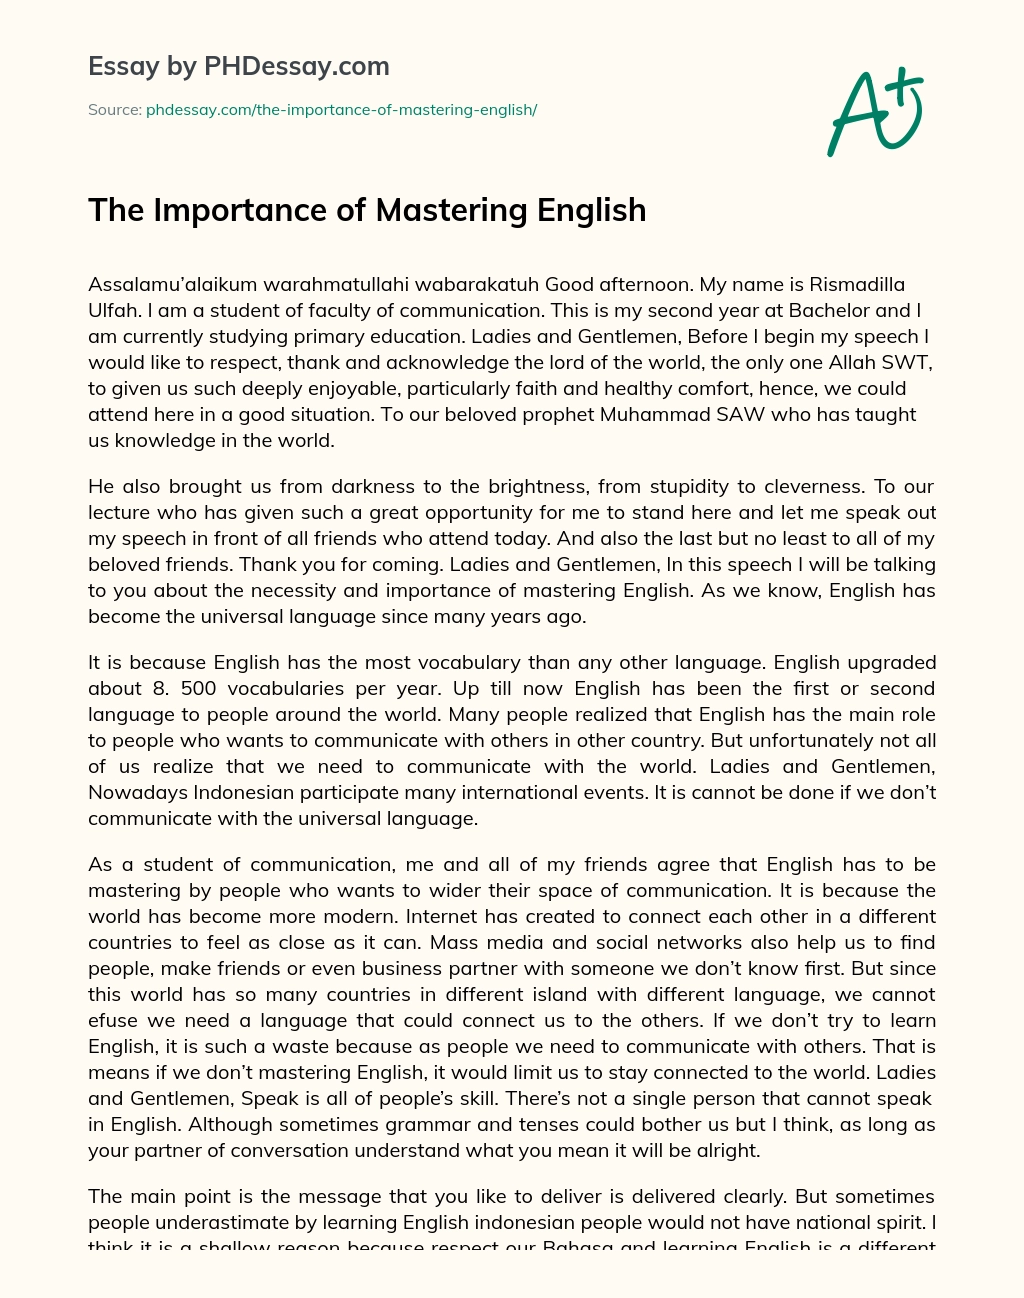 The Importance of Mastering English essay